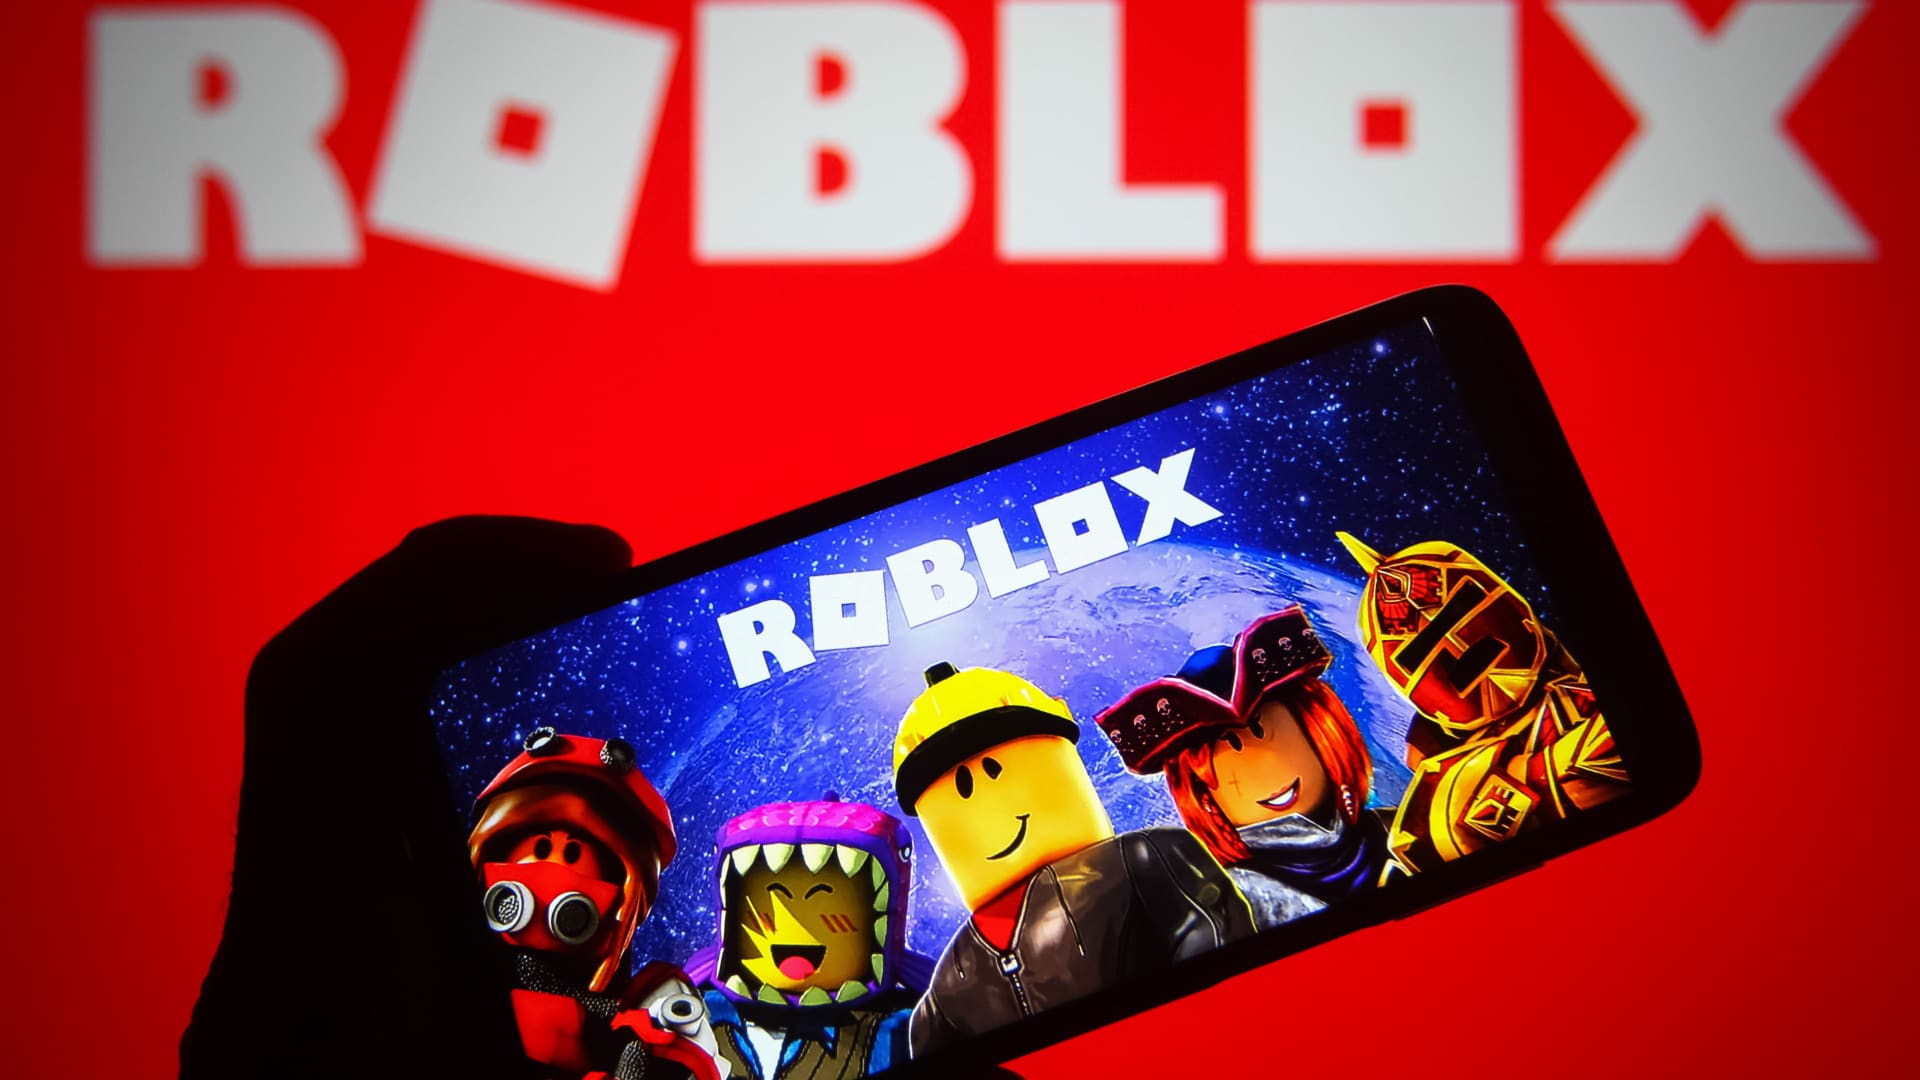 Roblox shares drop 17% after company misses estimates on top and bottom line 